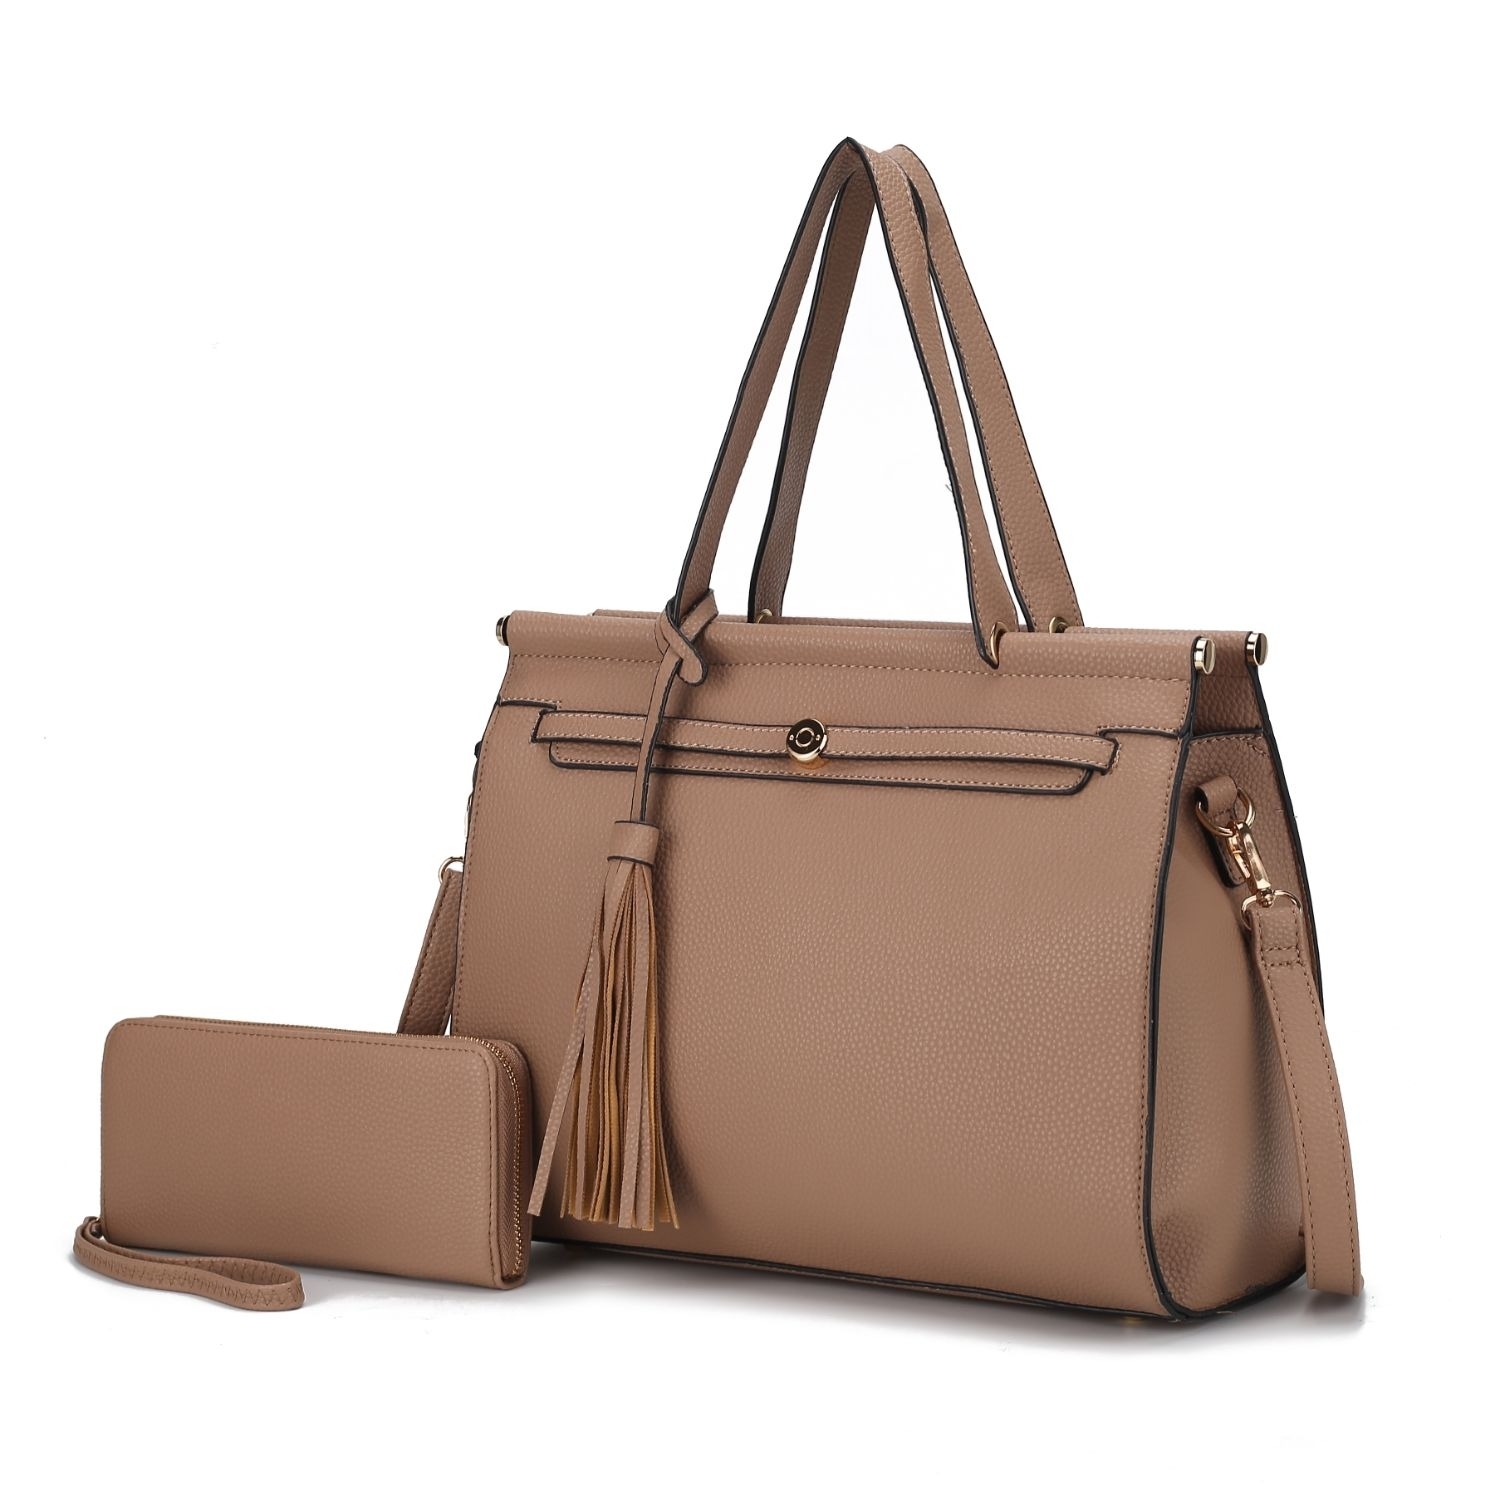 MKF Collection Shelby Vegan Leather Women's Satchel Bag By Mia K With Wallet -2 Pieces - Camel